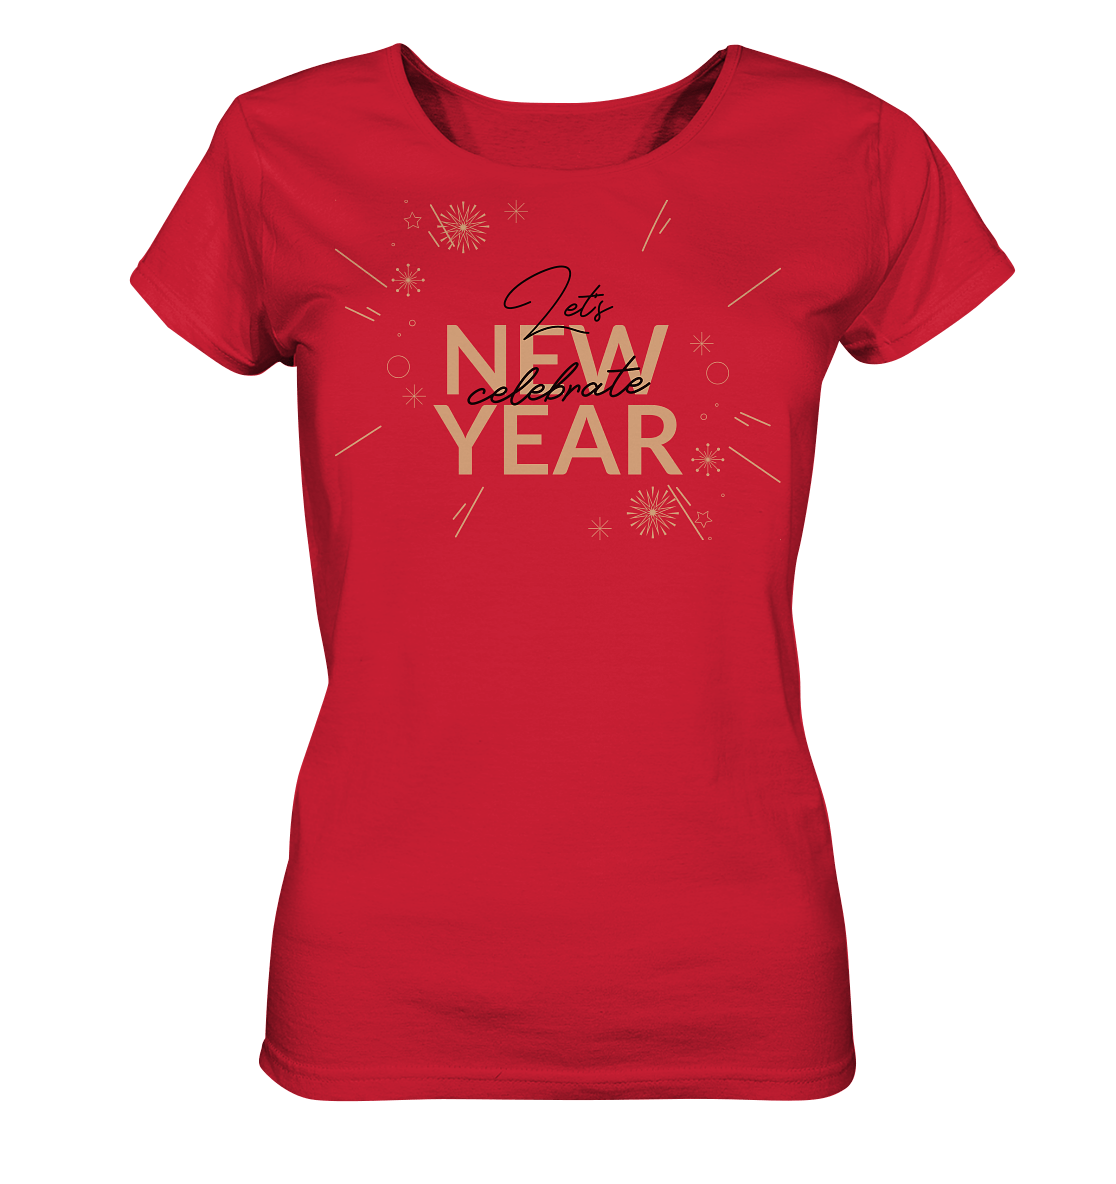 Damen Silvester T-Shirt in rot New Year Let's celebrate